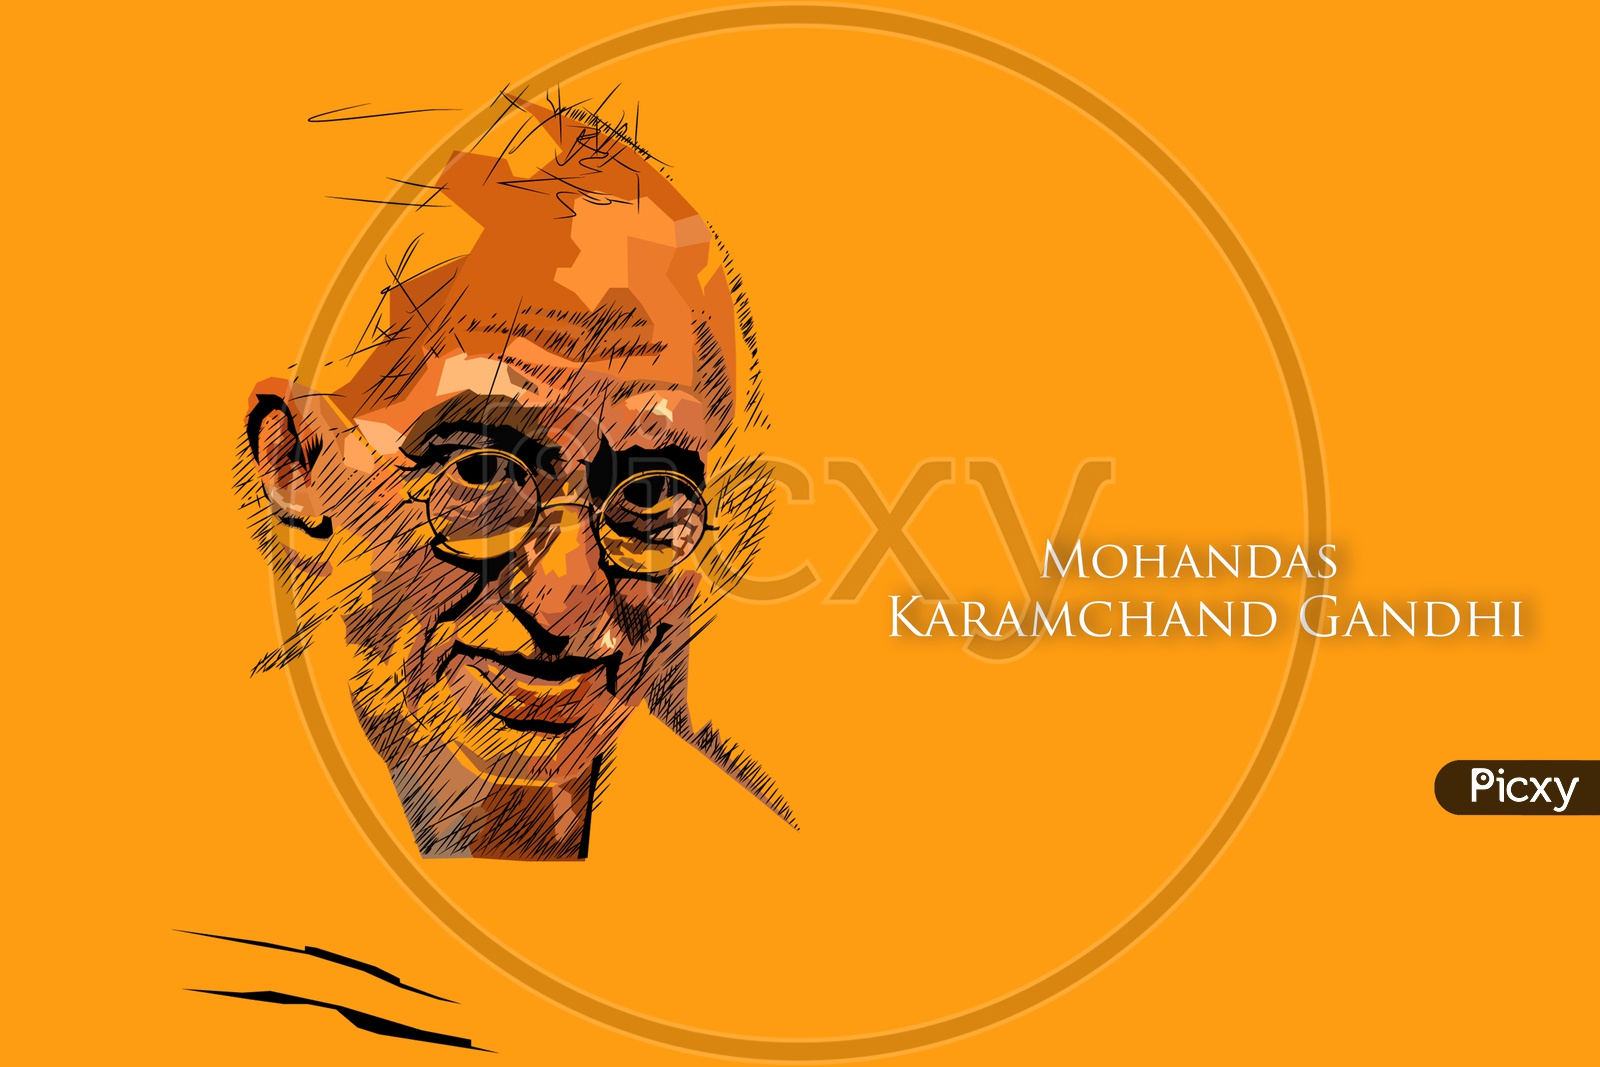 Poster for Gandhi Jayanti on 2nd October on the eve of father of the nation Mohandas Karamchand Gandhi Birthday in India